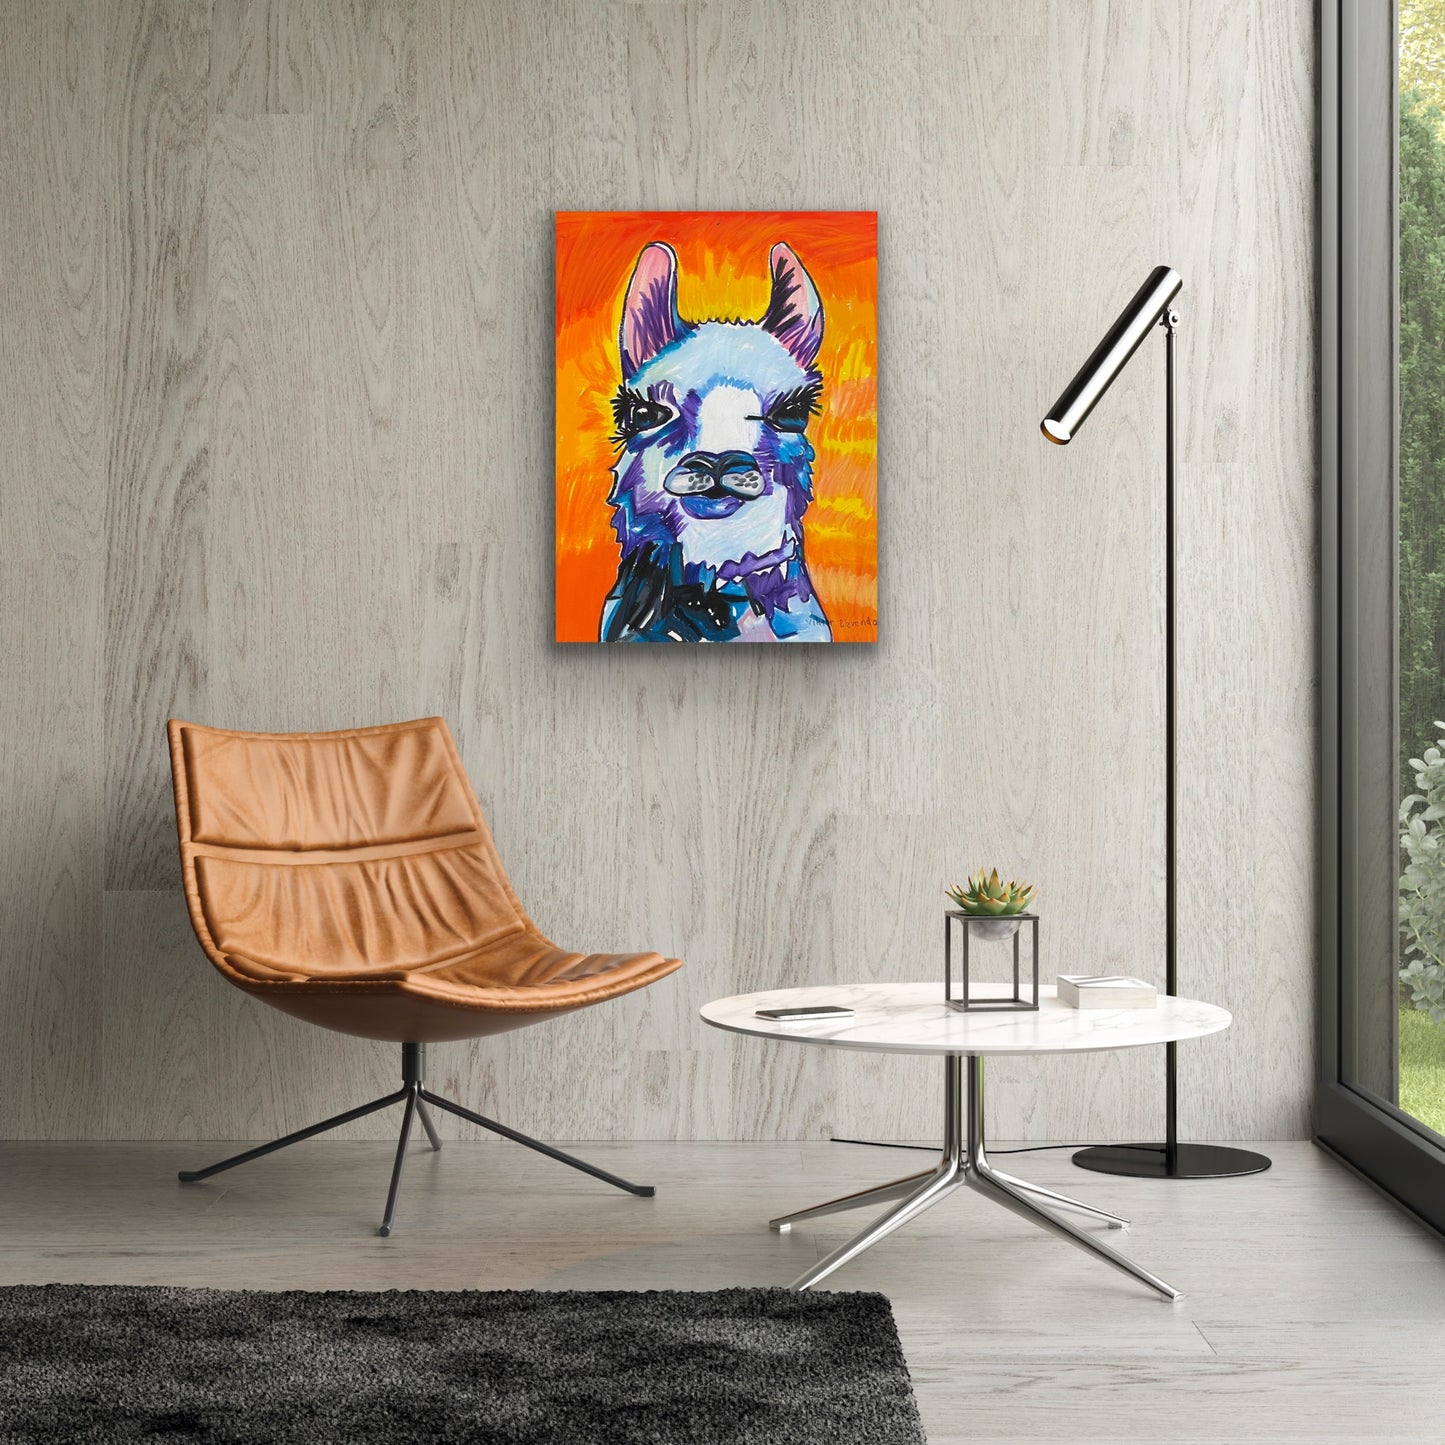 Llama - Stretched Canvas Print in more sizes